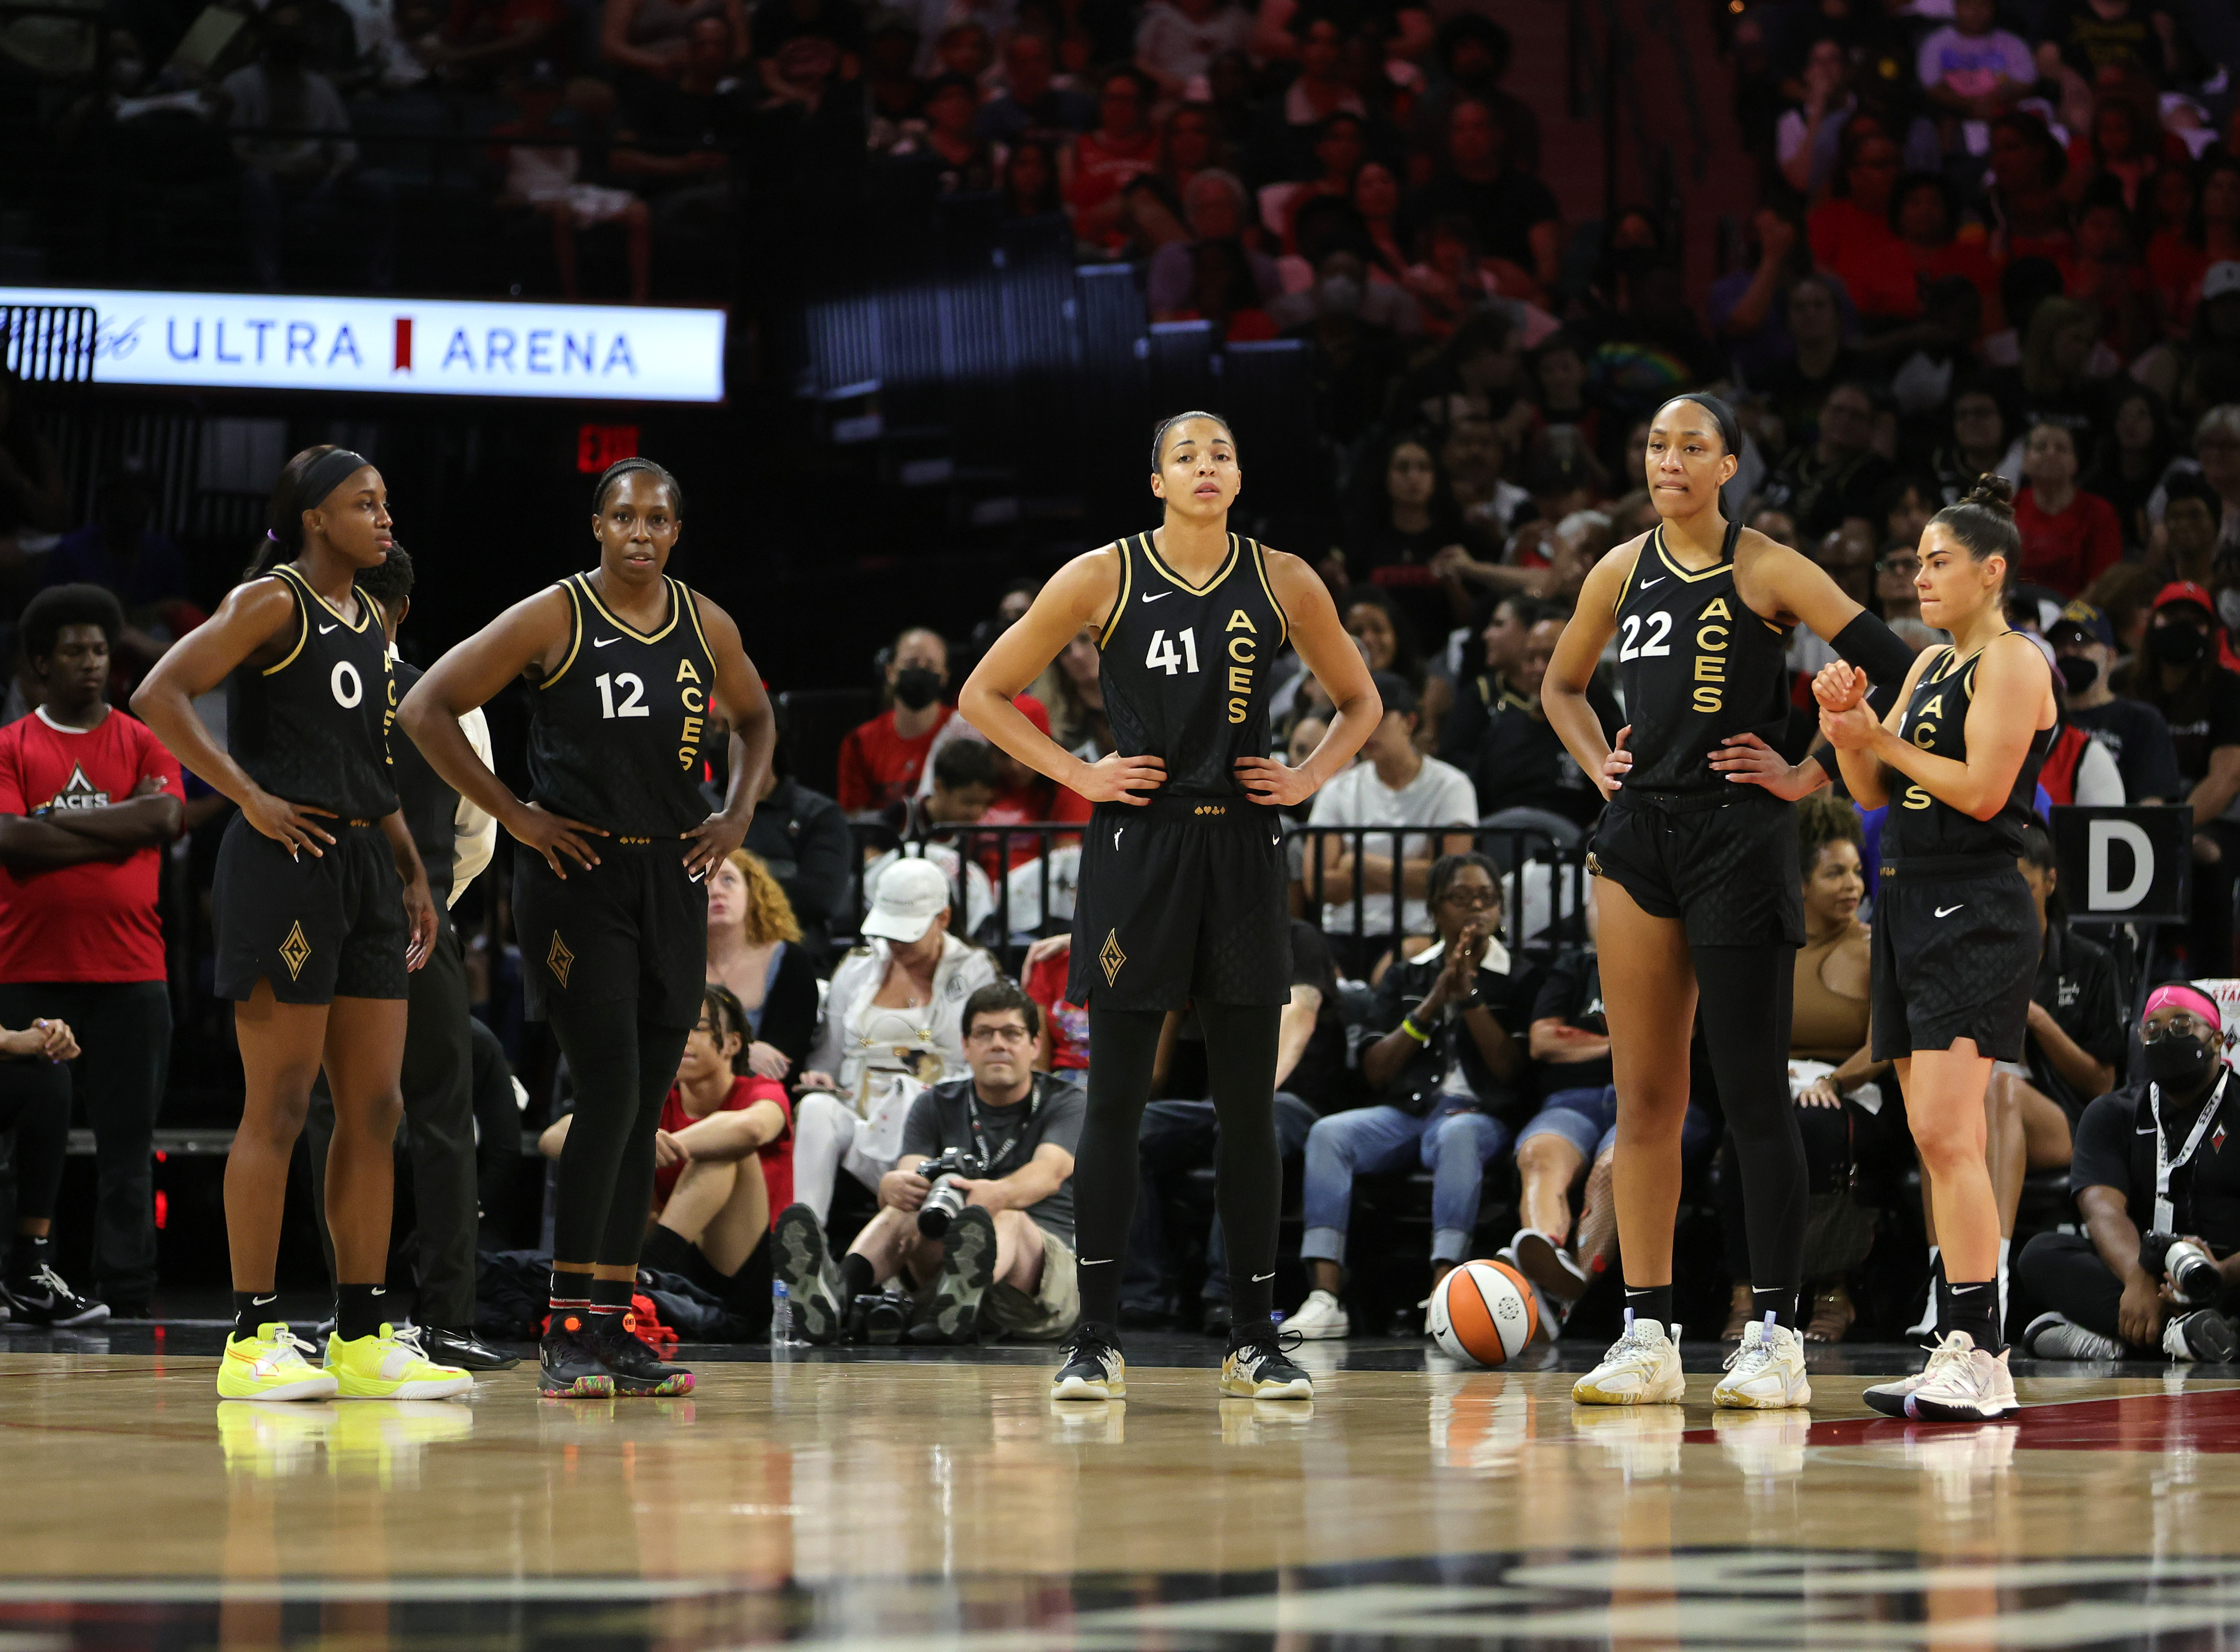 Jackie Young #0, Chelsea Gray #12, Kiah Stokes #41, A’ja Wilson #22 and Kelsey Plum #10 of the Las Vegas Aces stand on the court in the first quarter of Game Two of the 2022 WNBA Playoffs first round against the Phoenix Mercury at Michelob ULTRA Arena on August 20, 2022 in Las Vegas, Nevada. The Aces defeated the Mercury 117-80 to win the series.